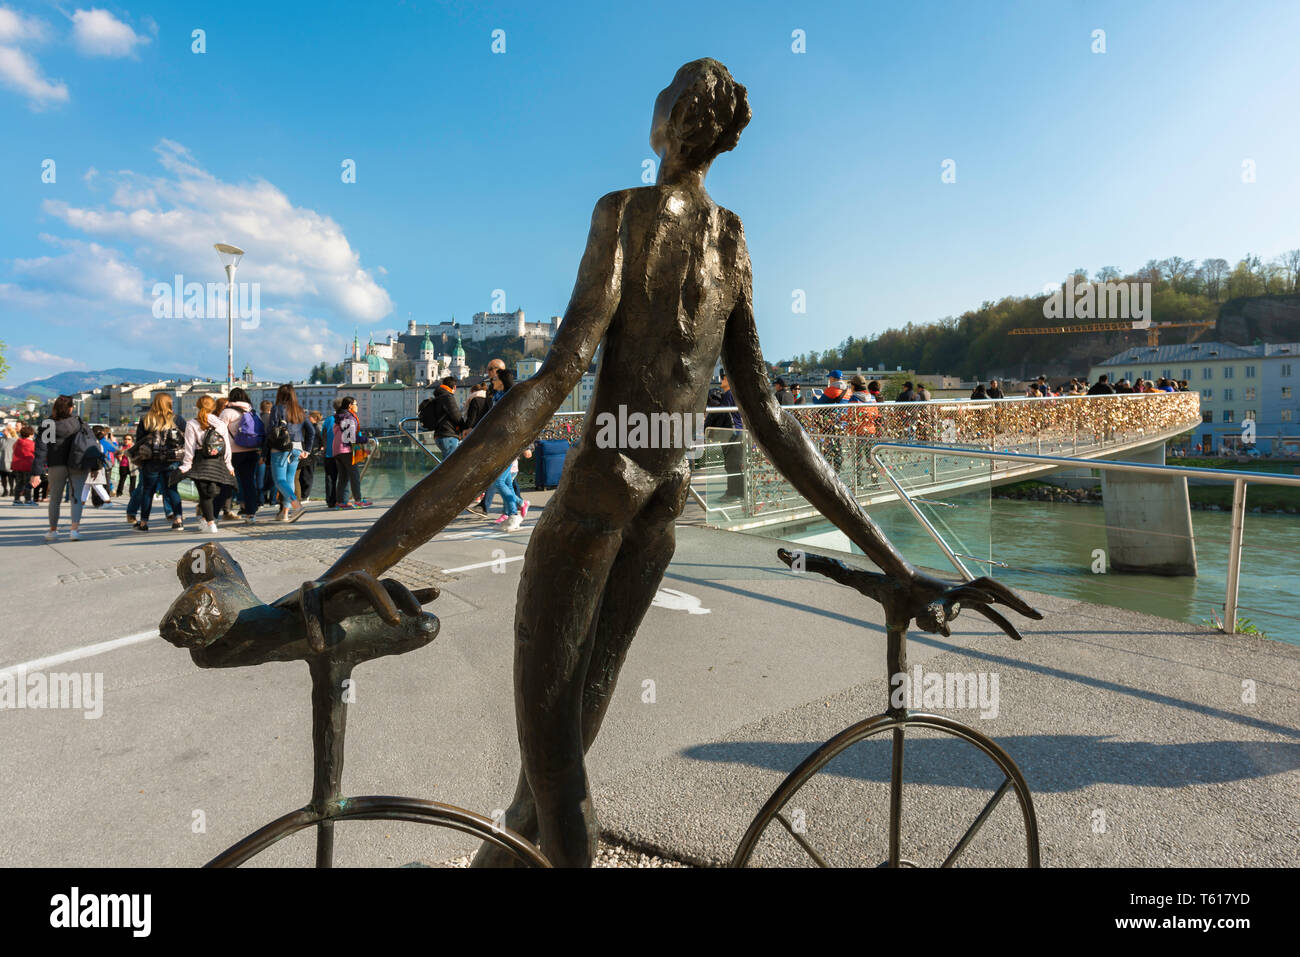 Cycling Salzburg, rear view of sculpture titled Cyclist (Radfahrer) sited beside the Elisabethkai cycle path in the city of Salzburg, Austria. Stock Photo